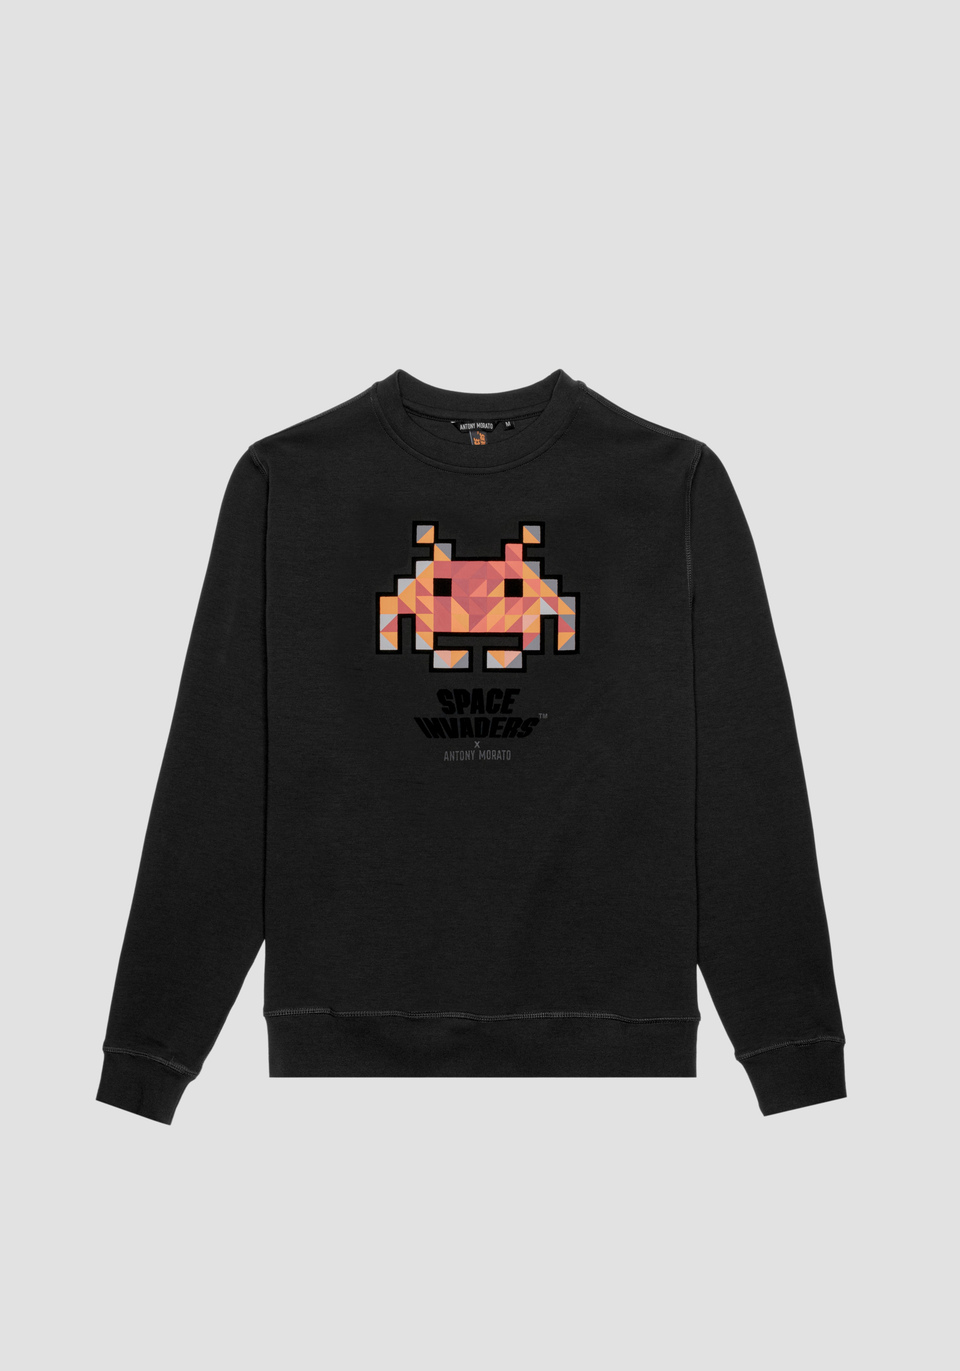 REGULAR FIT SWEATSHIRT IN SOFT COTTON BLEND WITH SPACE INVADERS PRINT - Antony Morato Online Shop